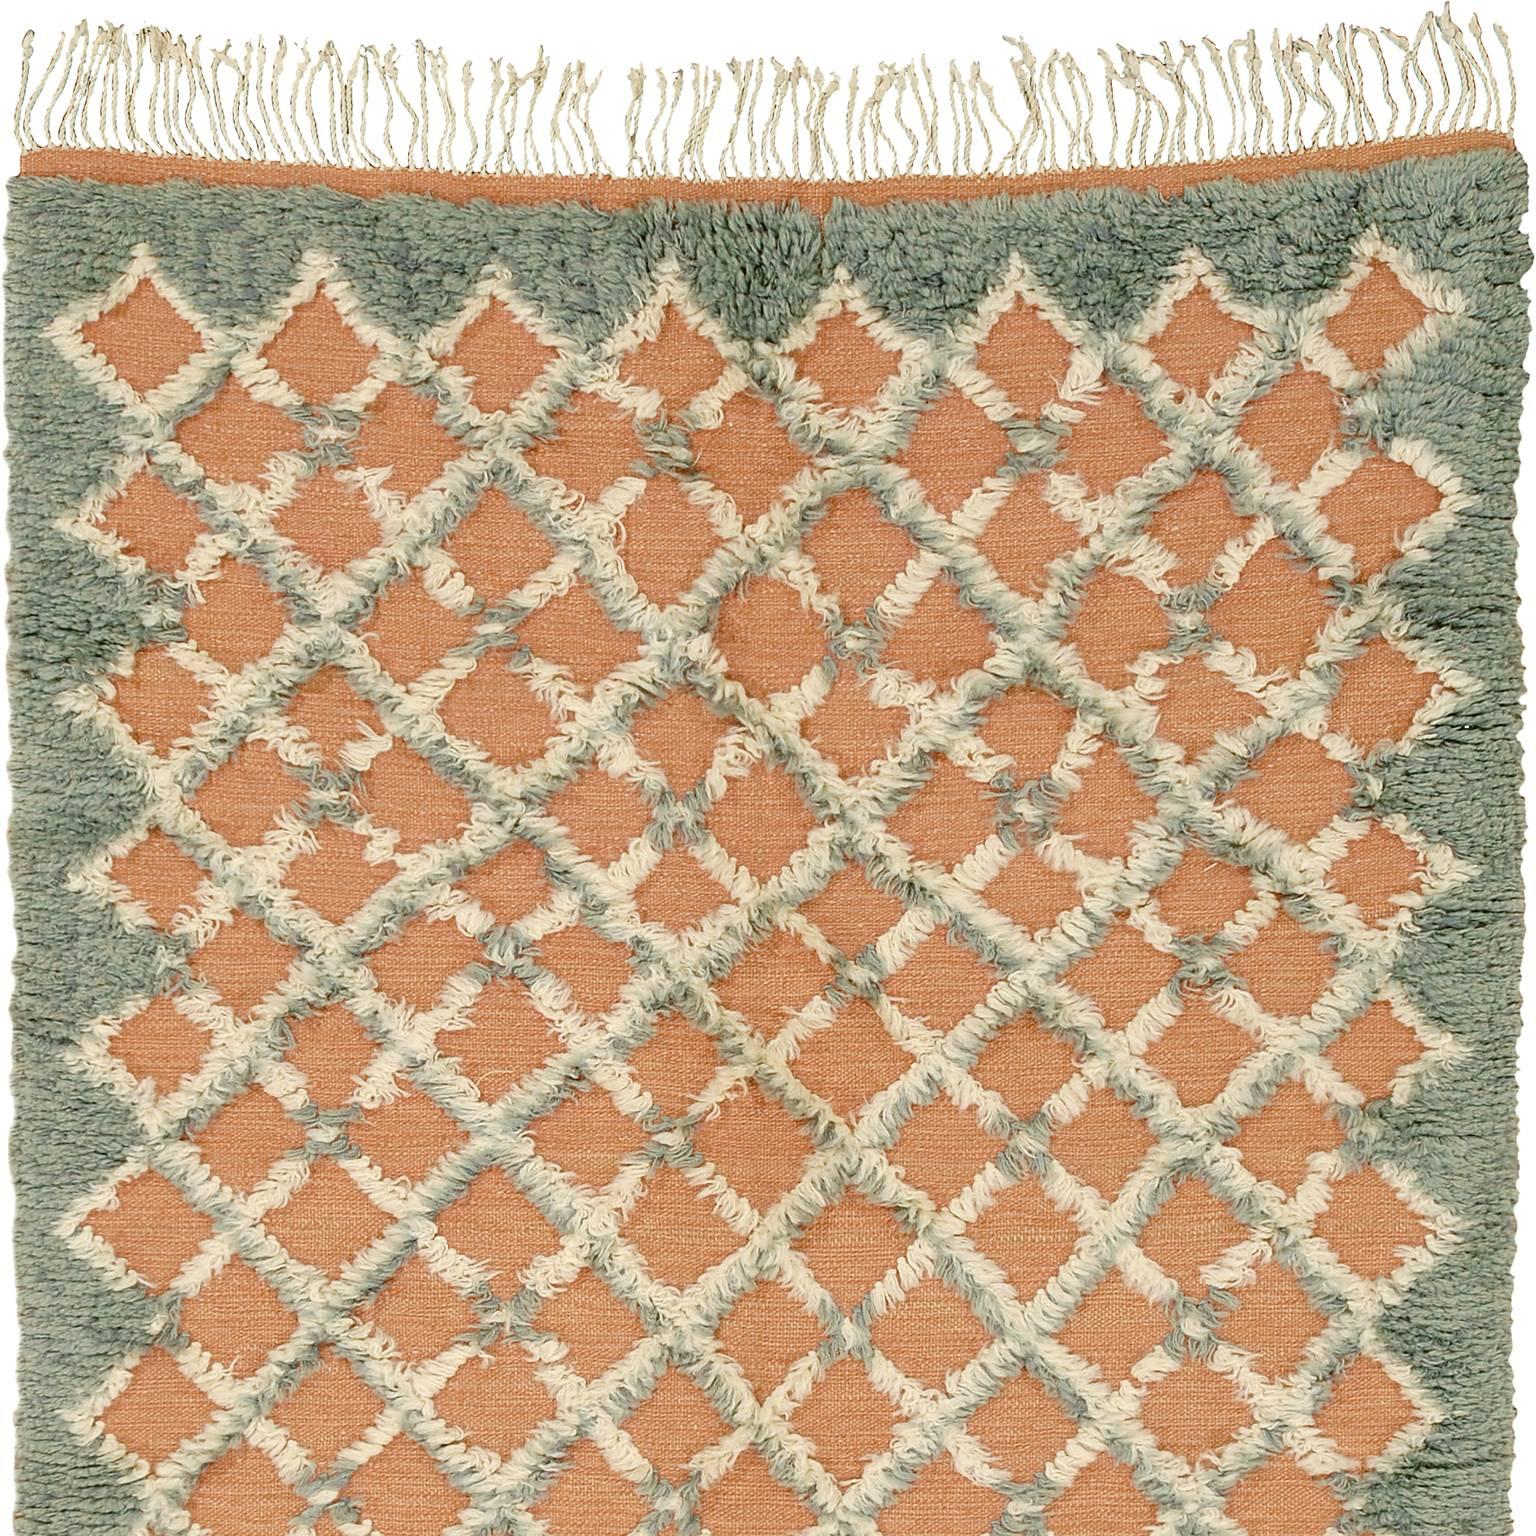 Mid 20th Century Swedish Pile Rug In Excellent Condition For Sale In New York, NY